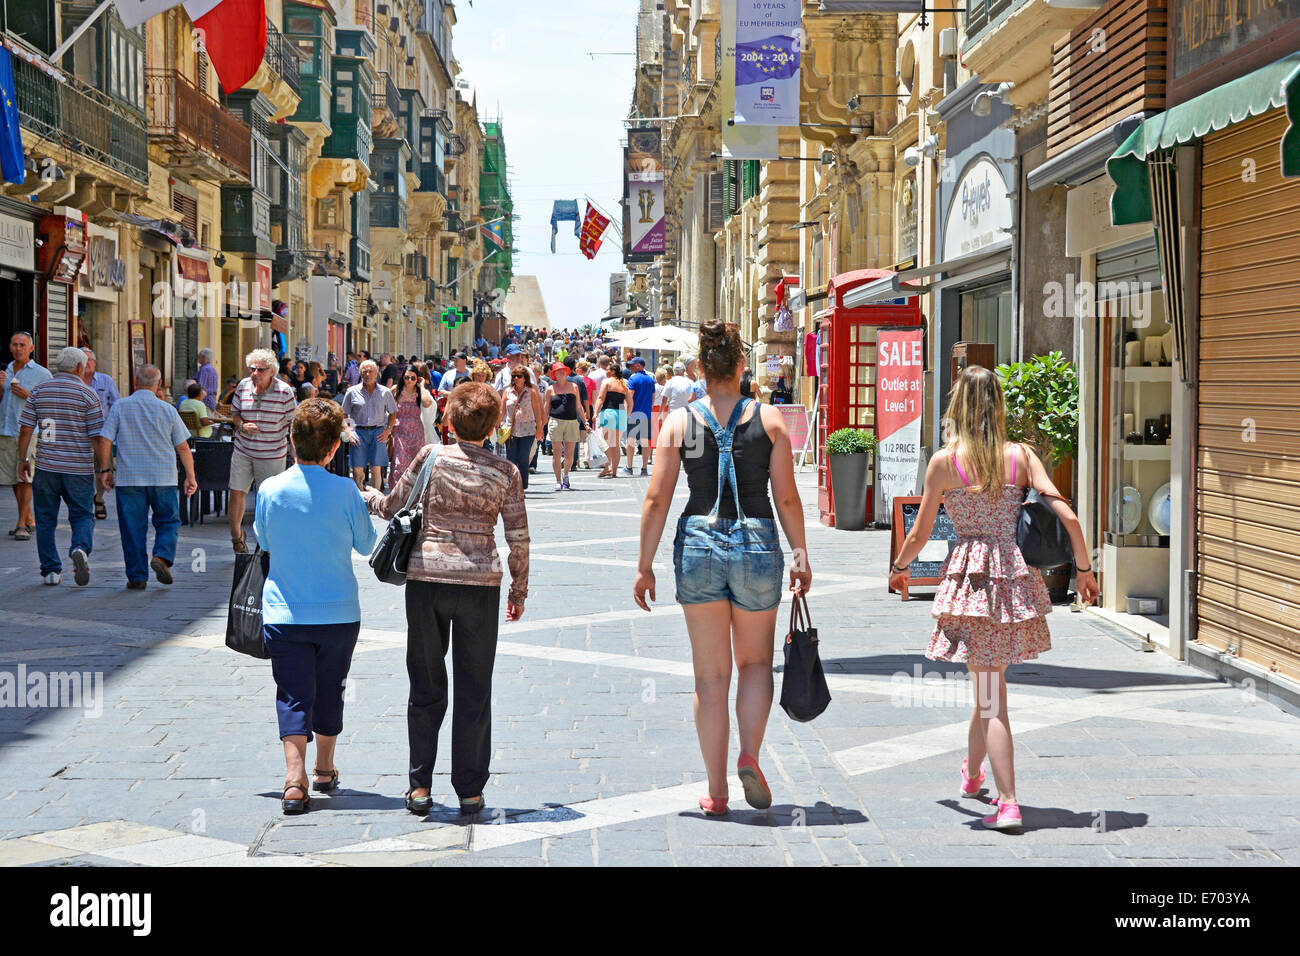 Back view four nearest women shoppers and or tourists in various fashion dress statements sunny shopping pedestrianised Republic Street Valletta Malta Stock Photo